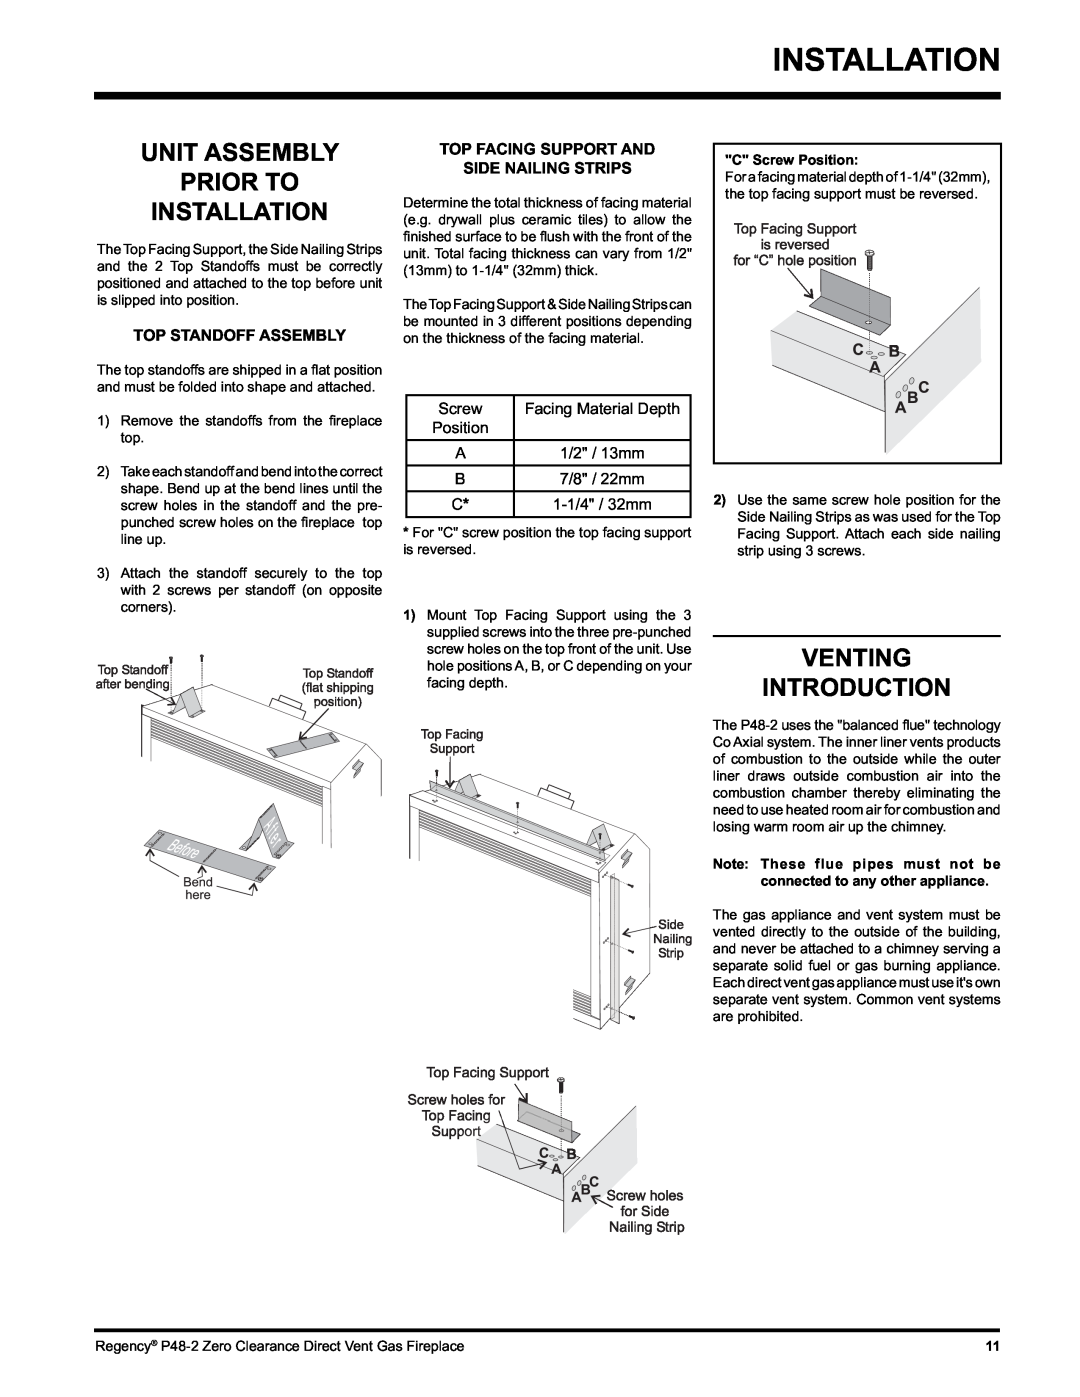 Regency P48-2 installation manual Installation, Venting, Introduction, Unit Assembly, Prior To, C Screw Position 